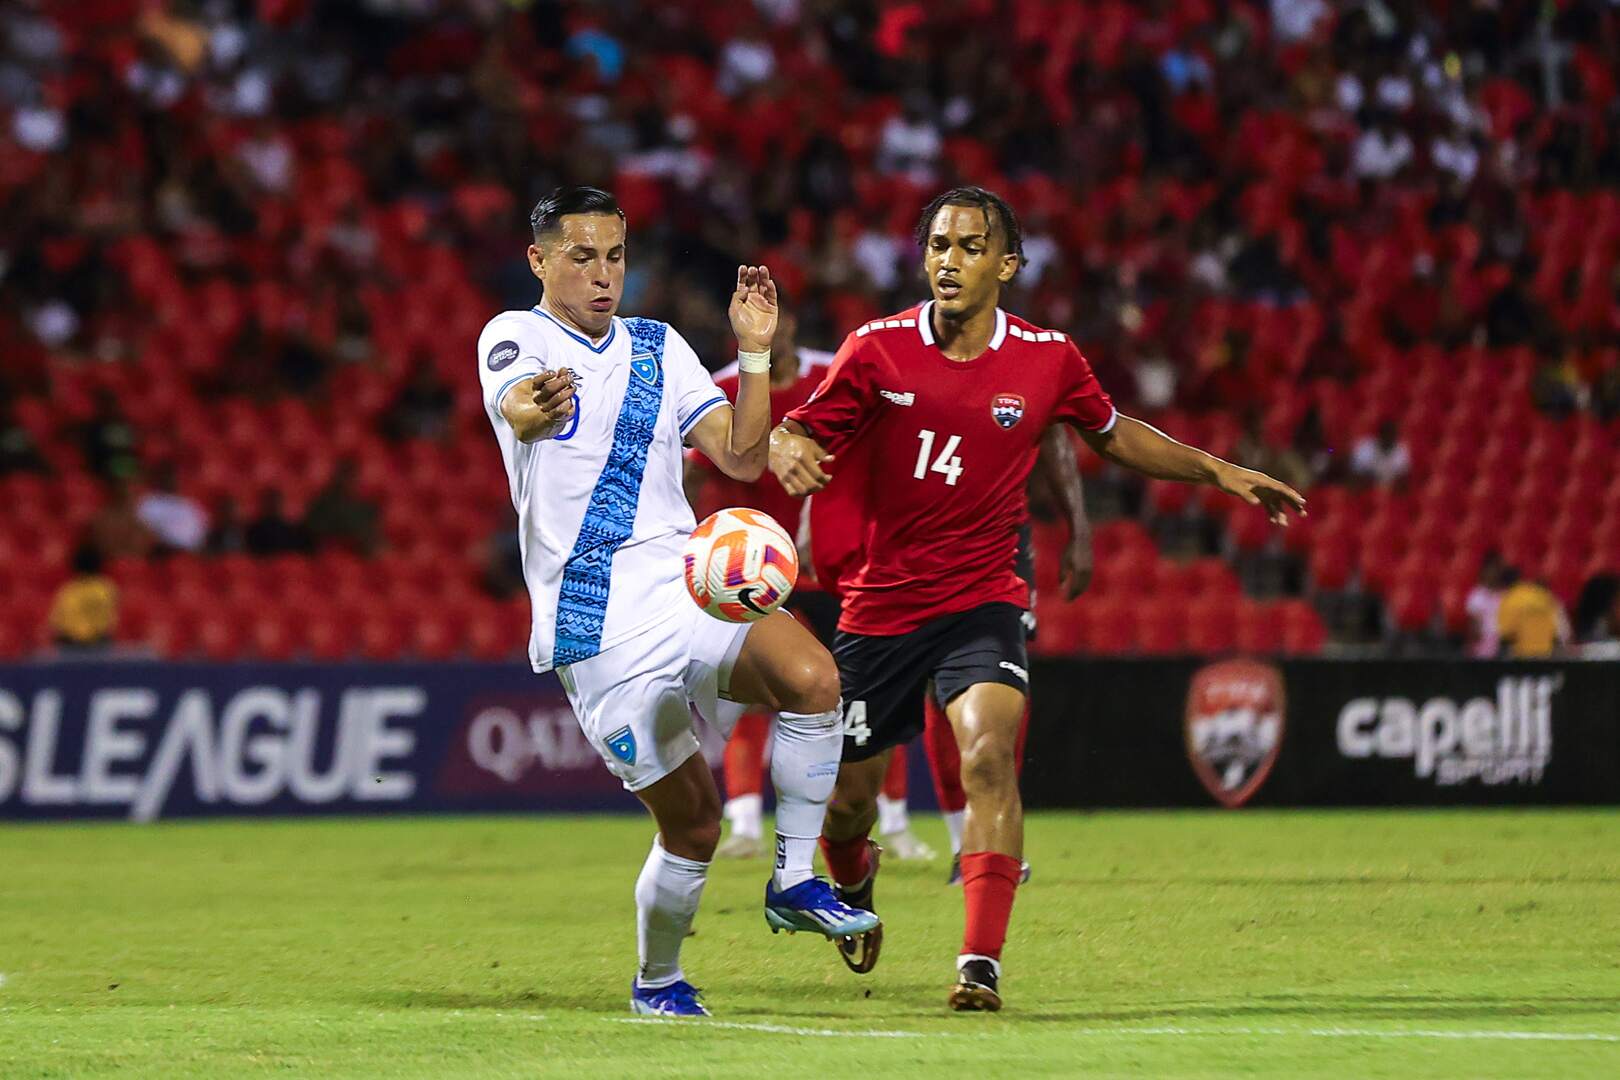 T&T make dramatic comeback to beat Guatemala 3-2 in CONCACAF Nations League